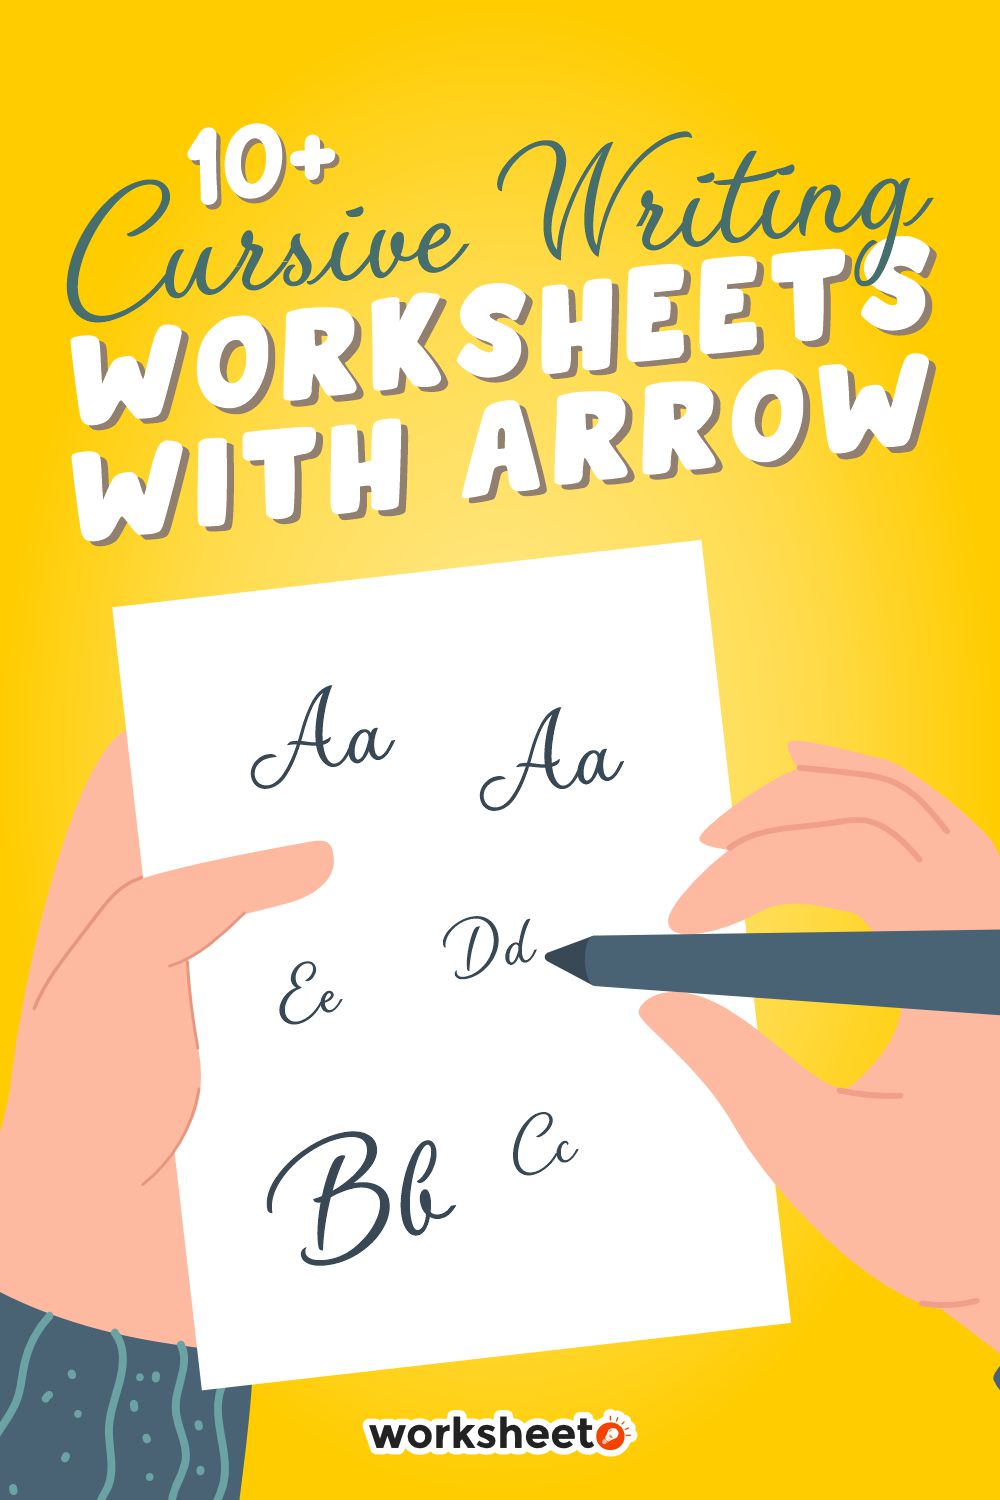 12 Images of Cursive Writing Worksheets With Arrows